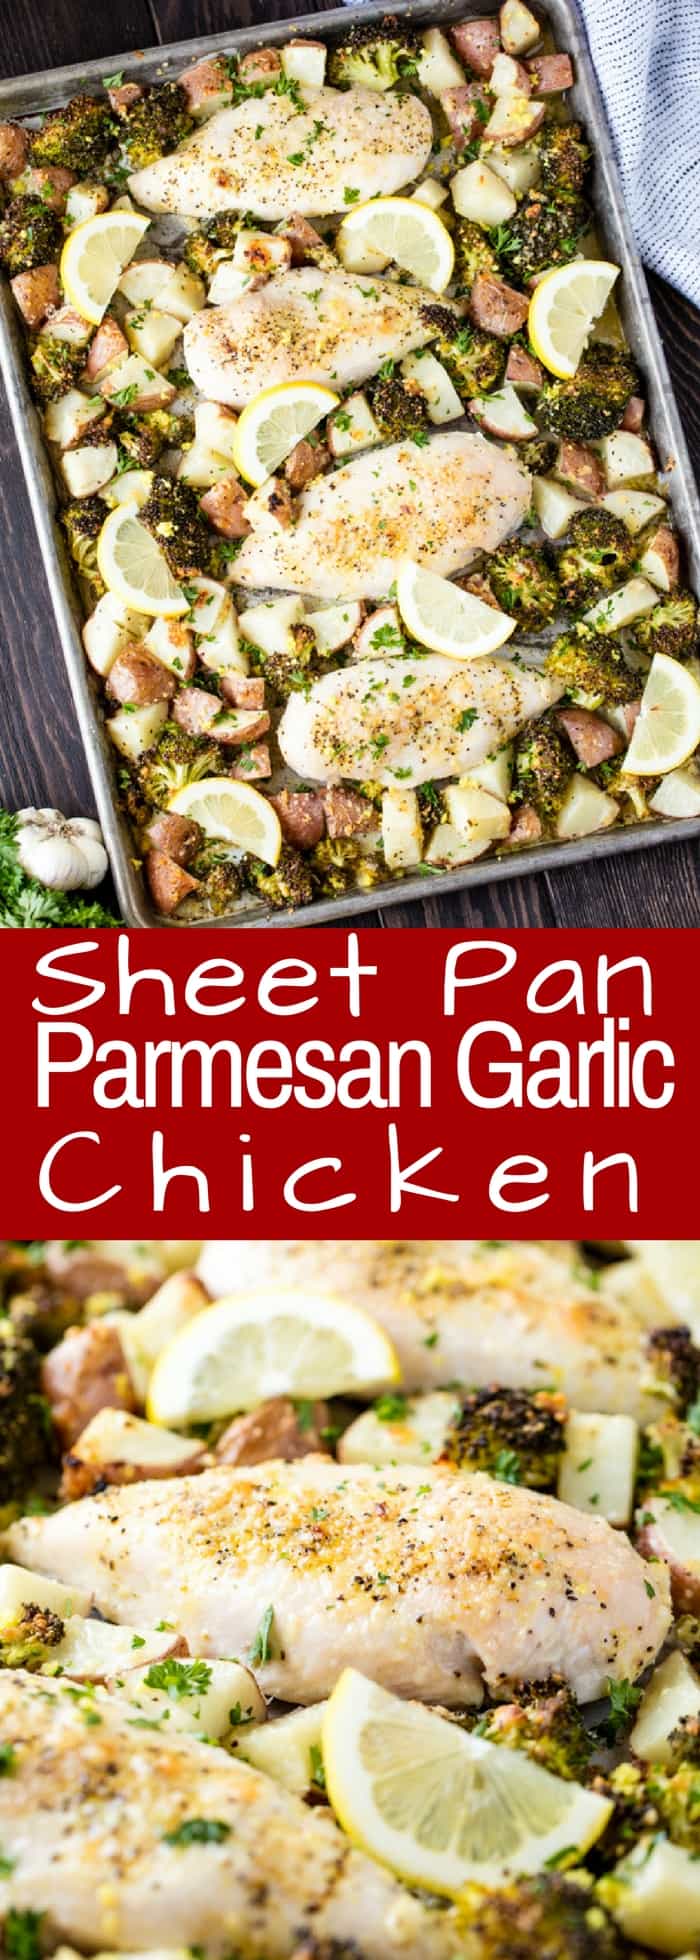 Sheet Pan Garlic Parmesan Chicken Broccoli and Potatoes is an easy weeknight dinner that's all made on one sheet pan. It's full of flavor and simple to make which makes it the perfect family dinner for busy nights. 